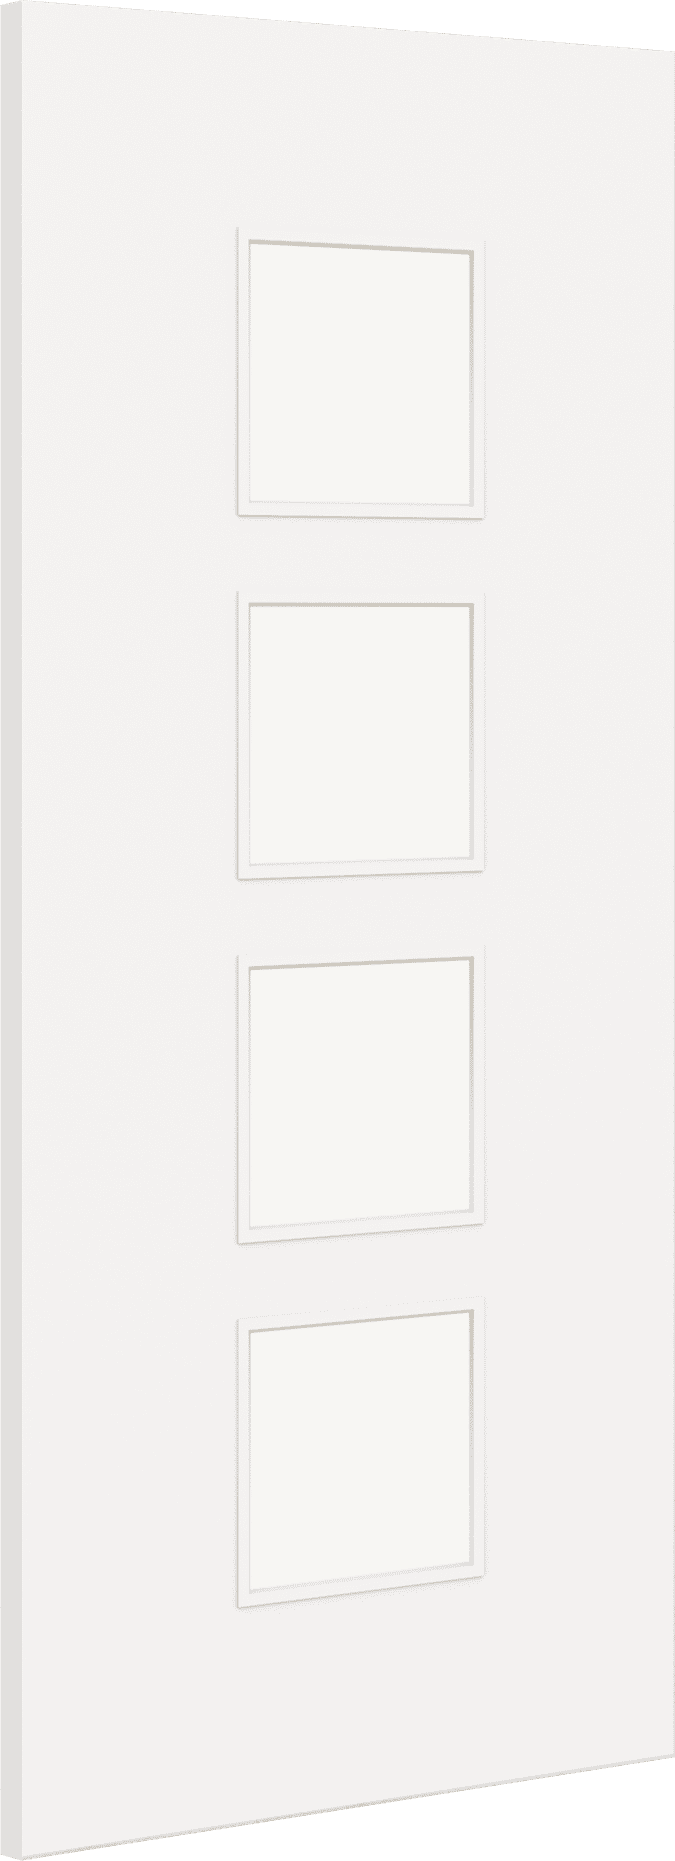 2040mm x 926mm x 44mm Architectural Paint Grade White 09 Frosted Glazed Fire Door Blank